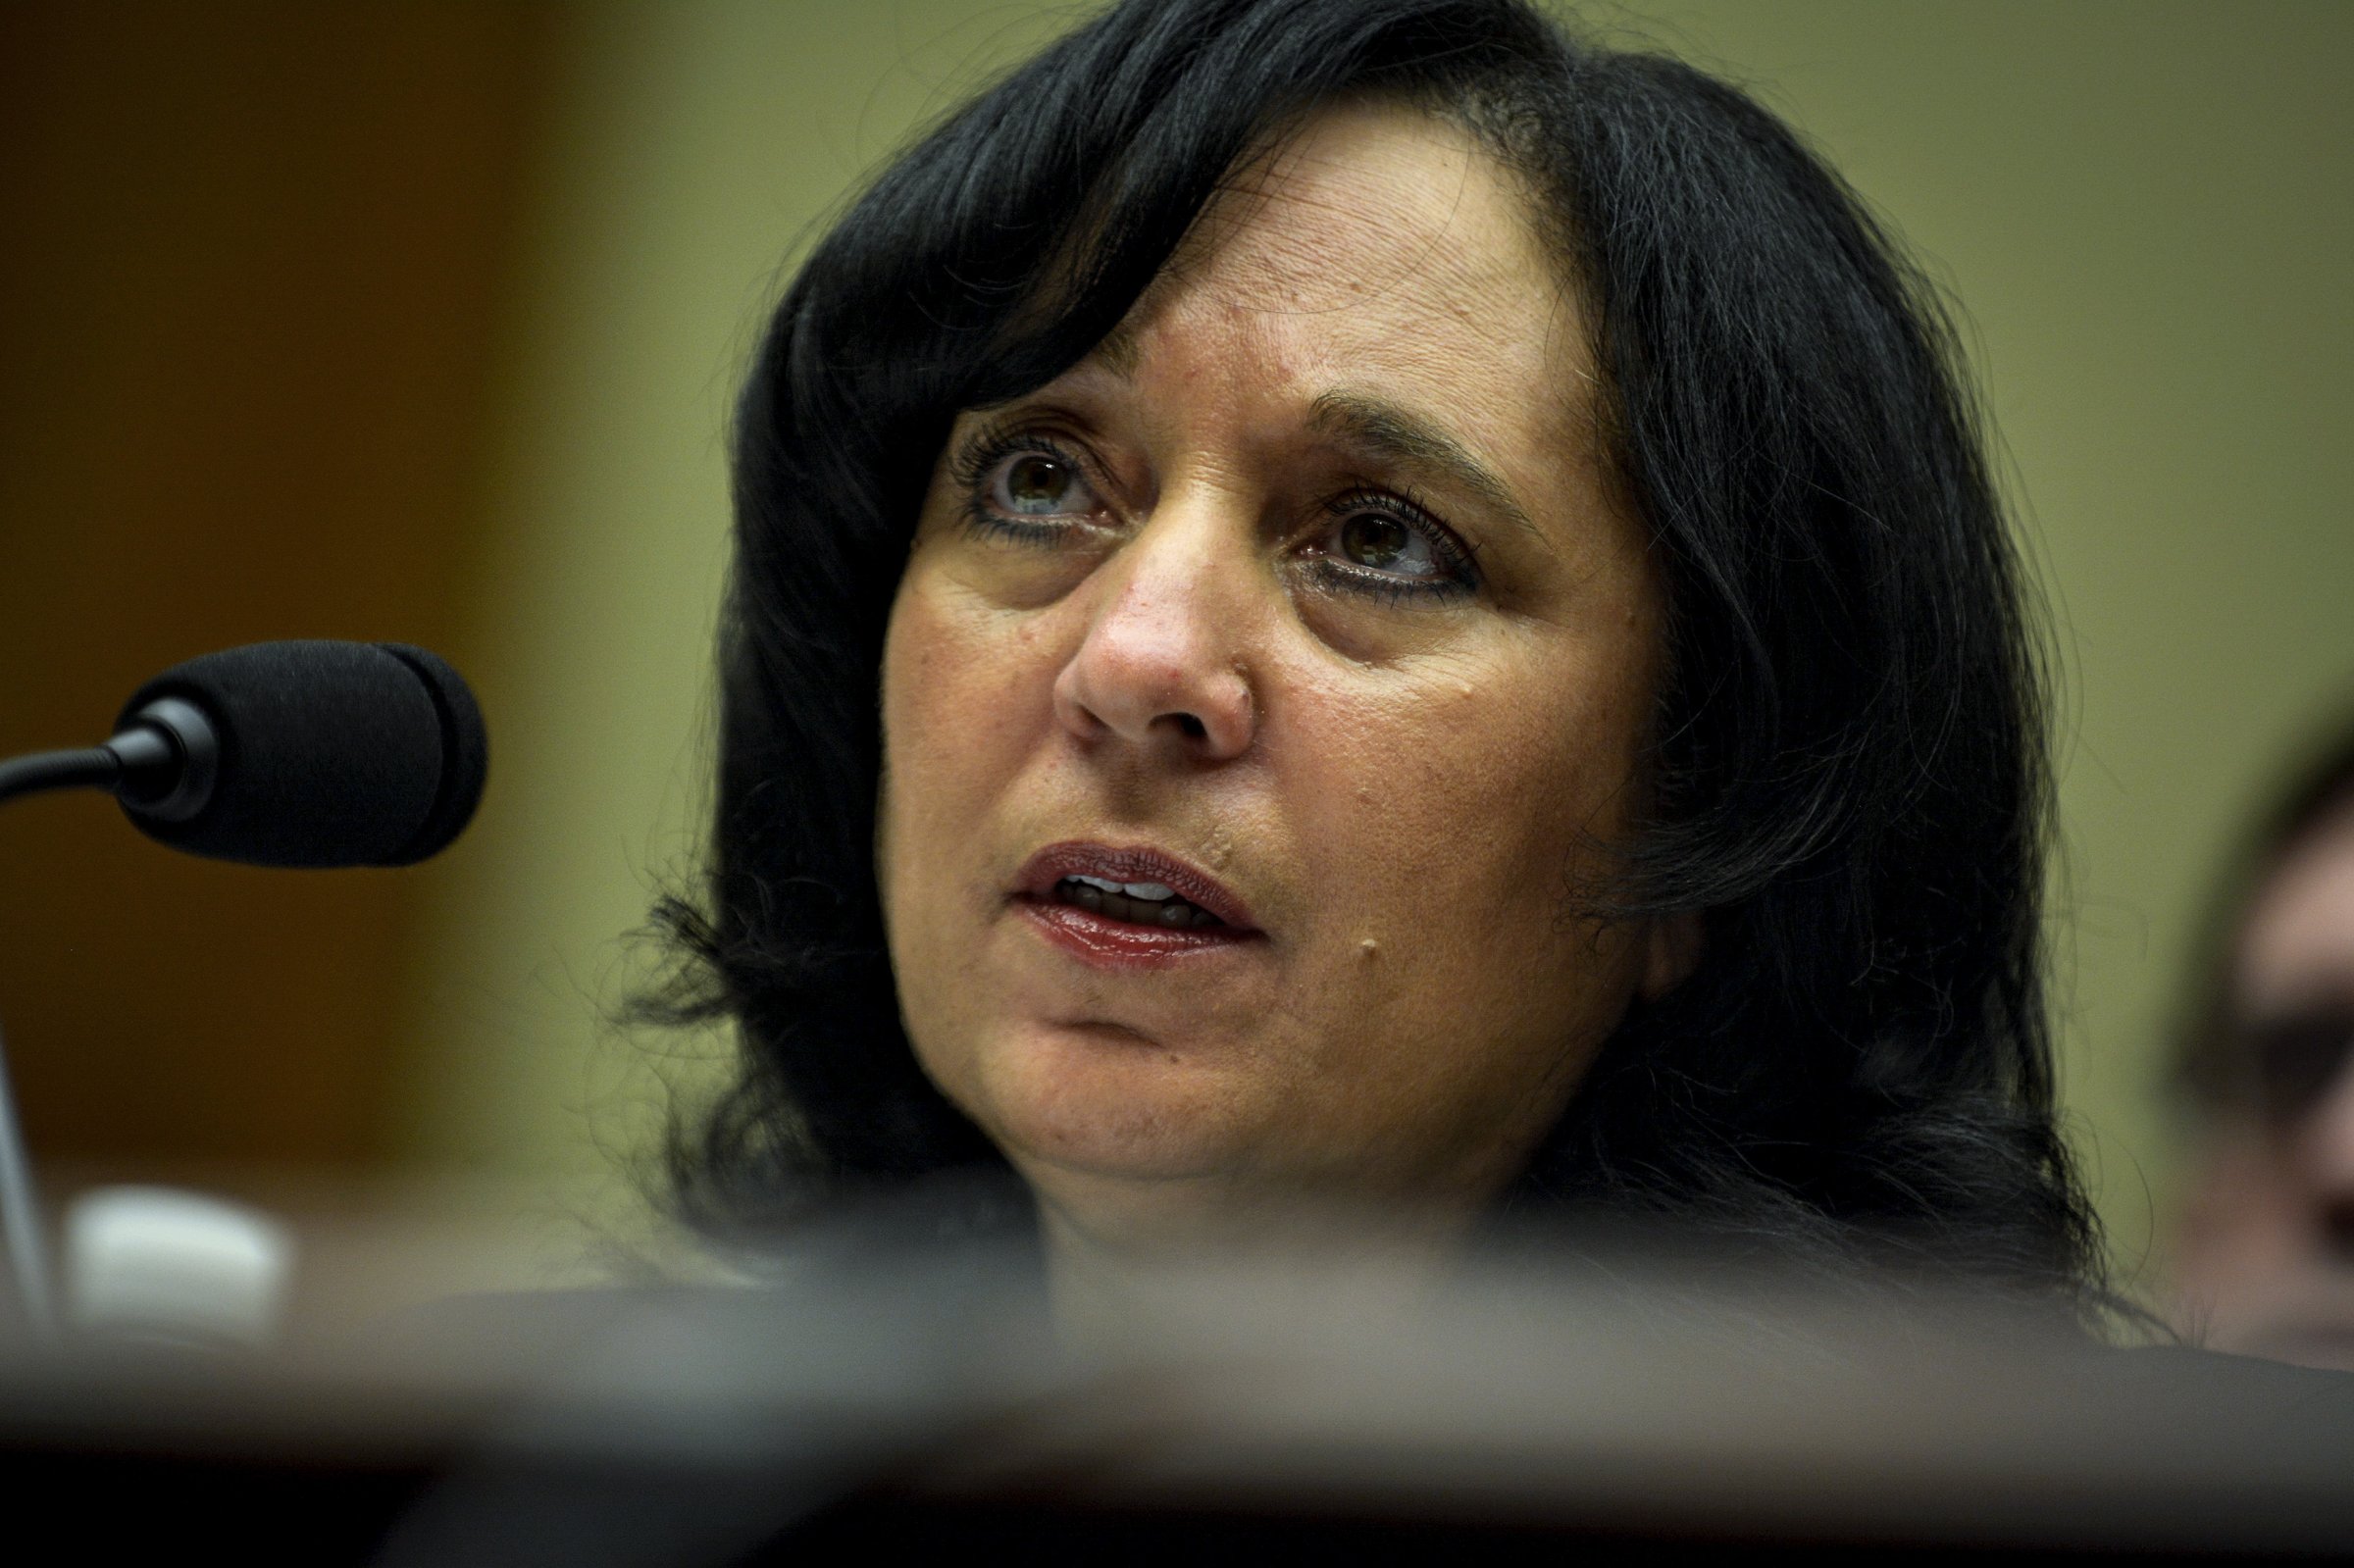 DEA administrator Michele Leonhart testifies before the House Committee on Oversight and Government Reform in a hearing on sexual harassment and misconduct allegations at the DEA and FBI in Washington on April 14, 2015.